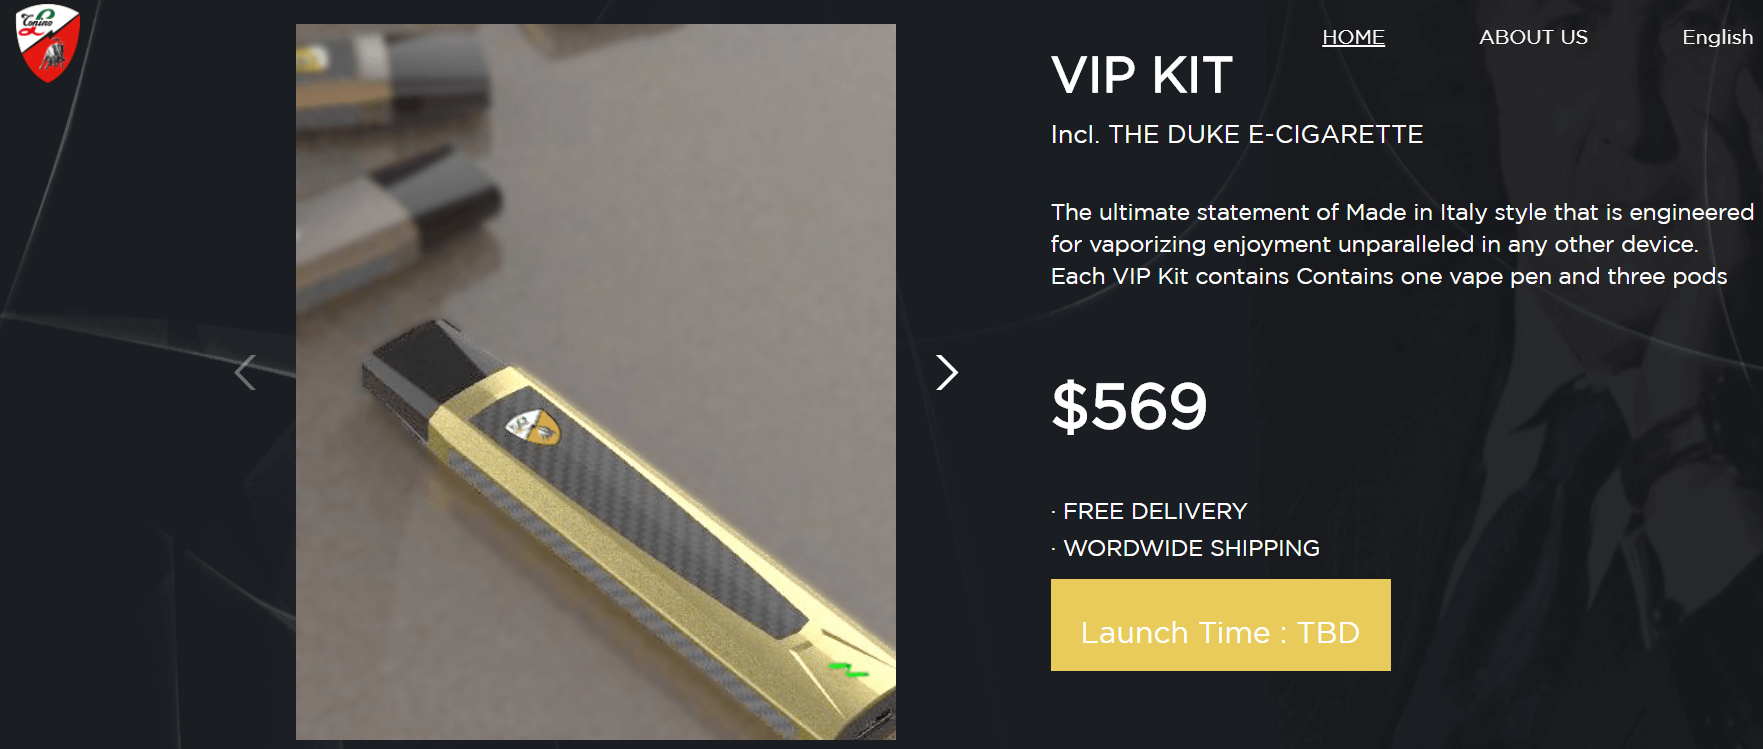 VIP KIT Incl. THE DUKE E-CIGARETTE The ultimate statement of Made in Italy style that is engineered for vaporizing enjoyment unparalleled in any other device. Each VIP Kit contains Contains one vape pen and three pods $569 · FREE DELIVERY · WORDWIDE SHIPPING